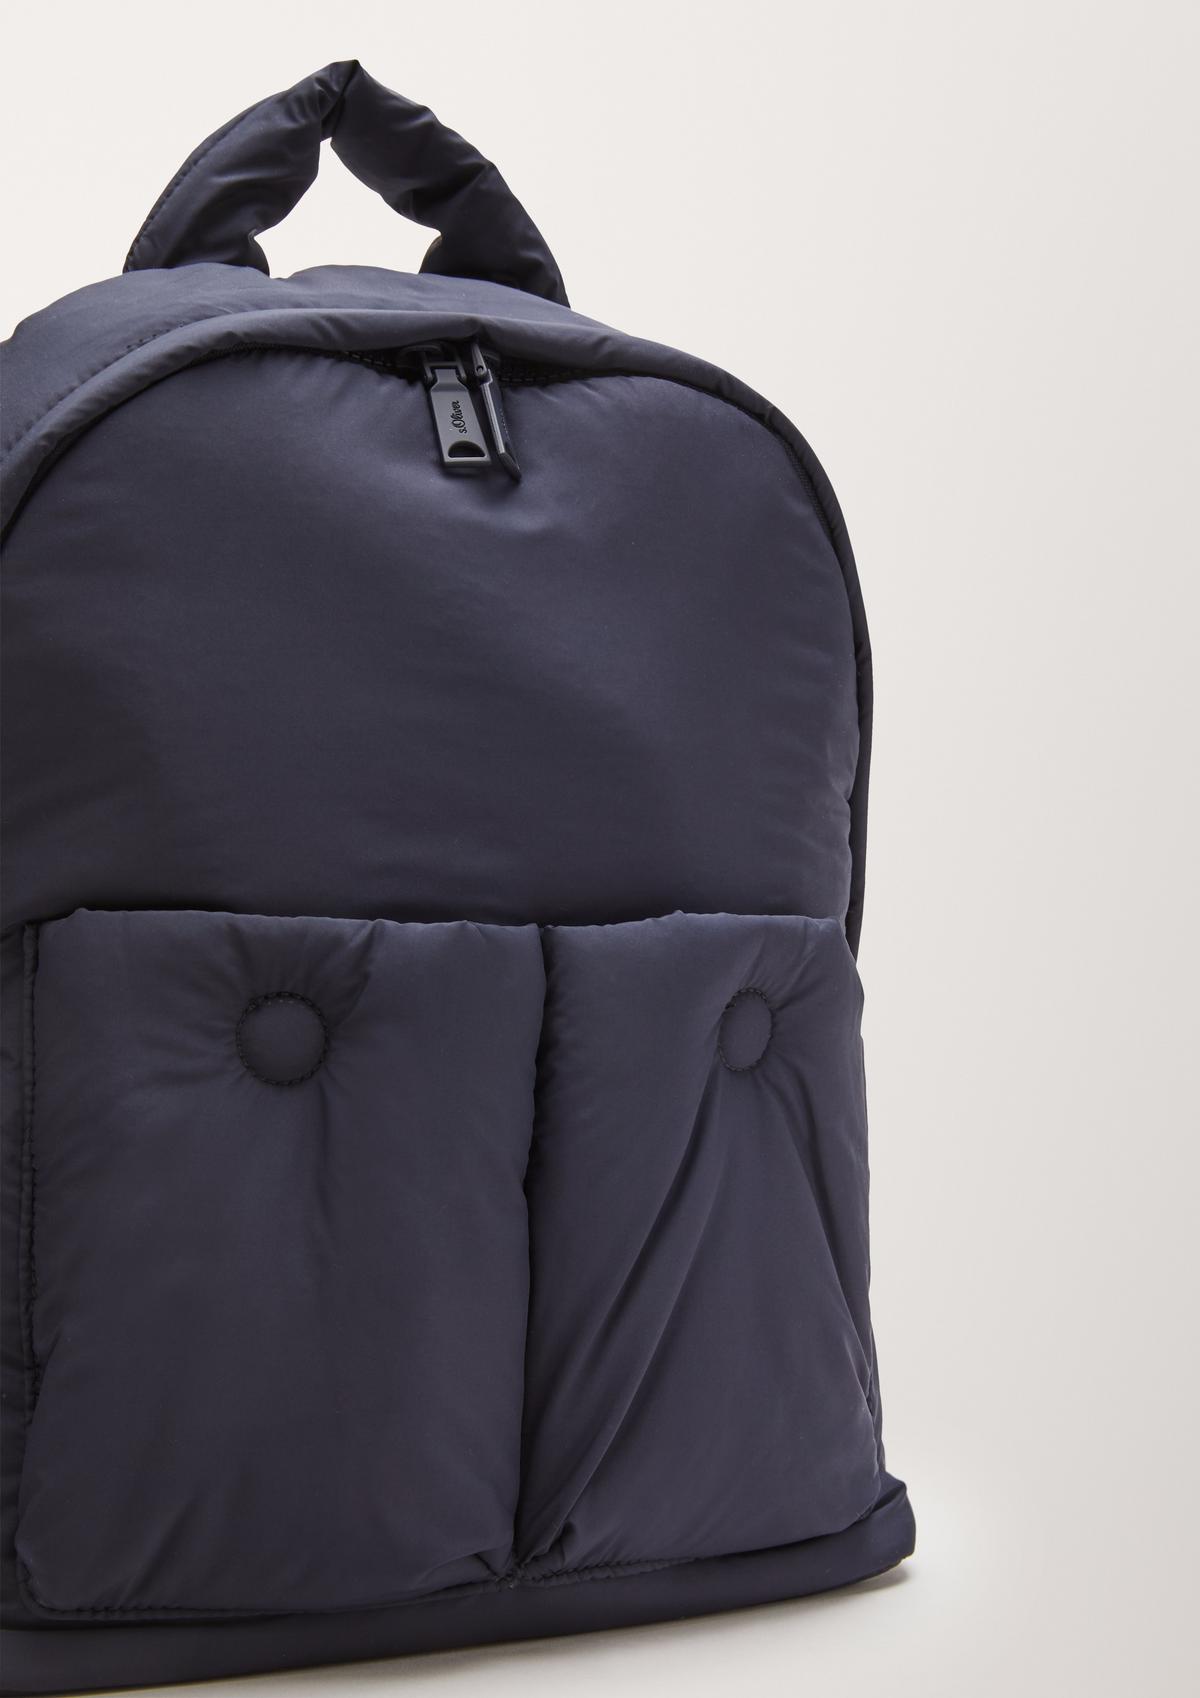 s.Oliver Rucksack with a padded compartment